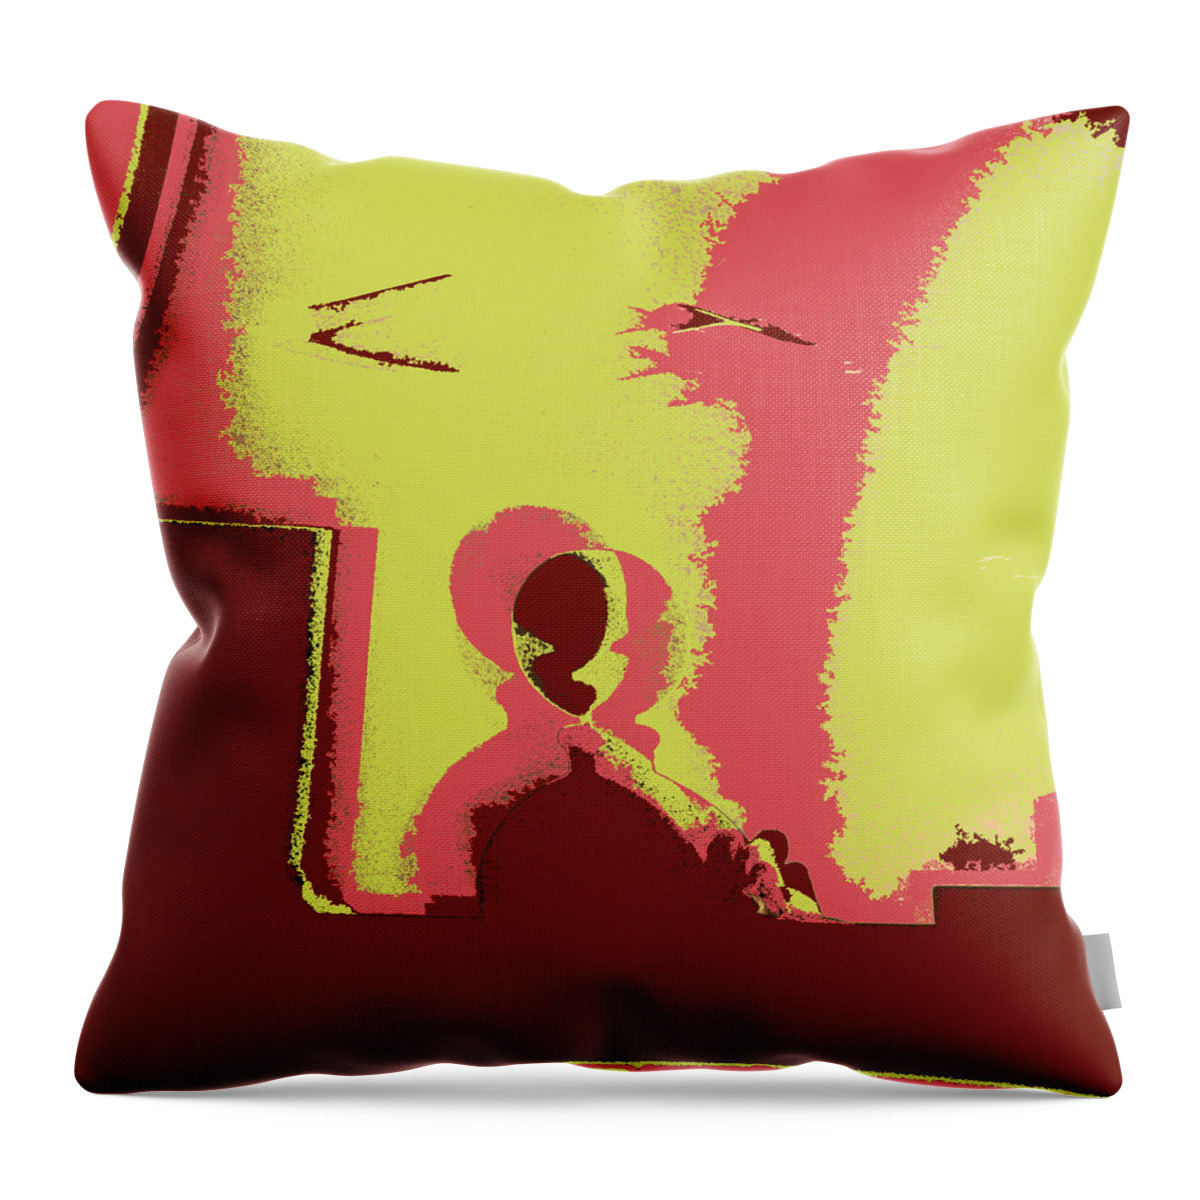 Abstract Abstraction Red Yellow Pink Decorative Design Conceptual Art Vibrant Unique Simplicity Illusion Still Life Reflections Shadows Colorful Original Tom Druin Artistic Pure Popular Tranquil Throw Pillow featuring the photograph Half Empty by Tom Druin